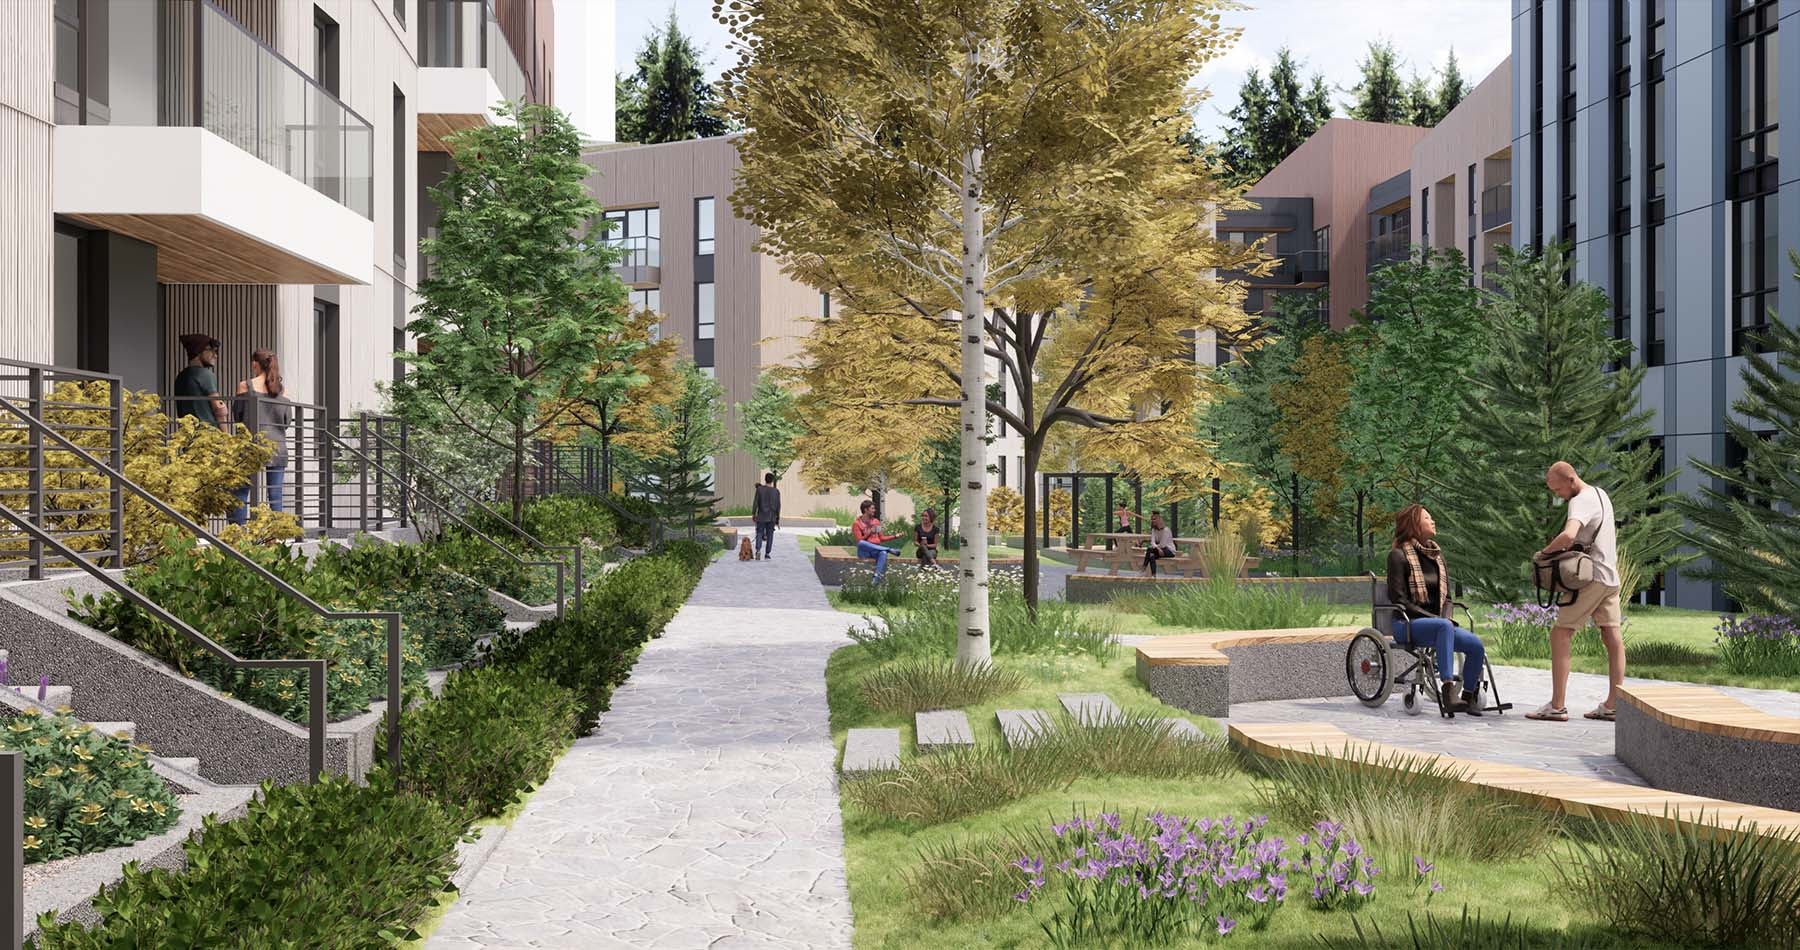 515 Affordable Staff Rental Homes Coming Soon to UBC Campus